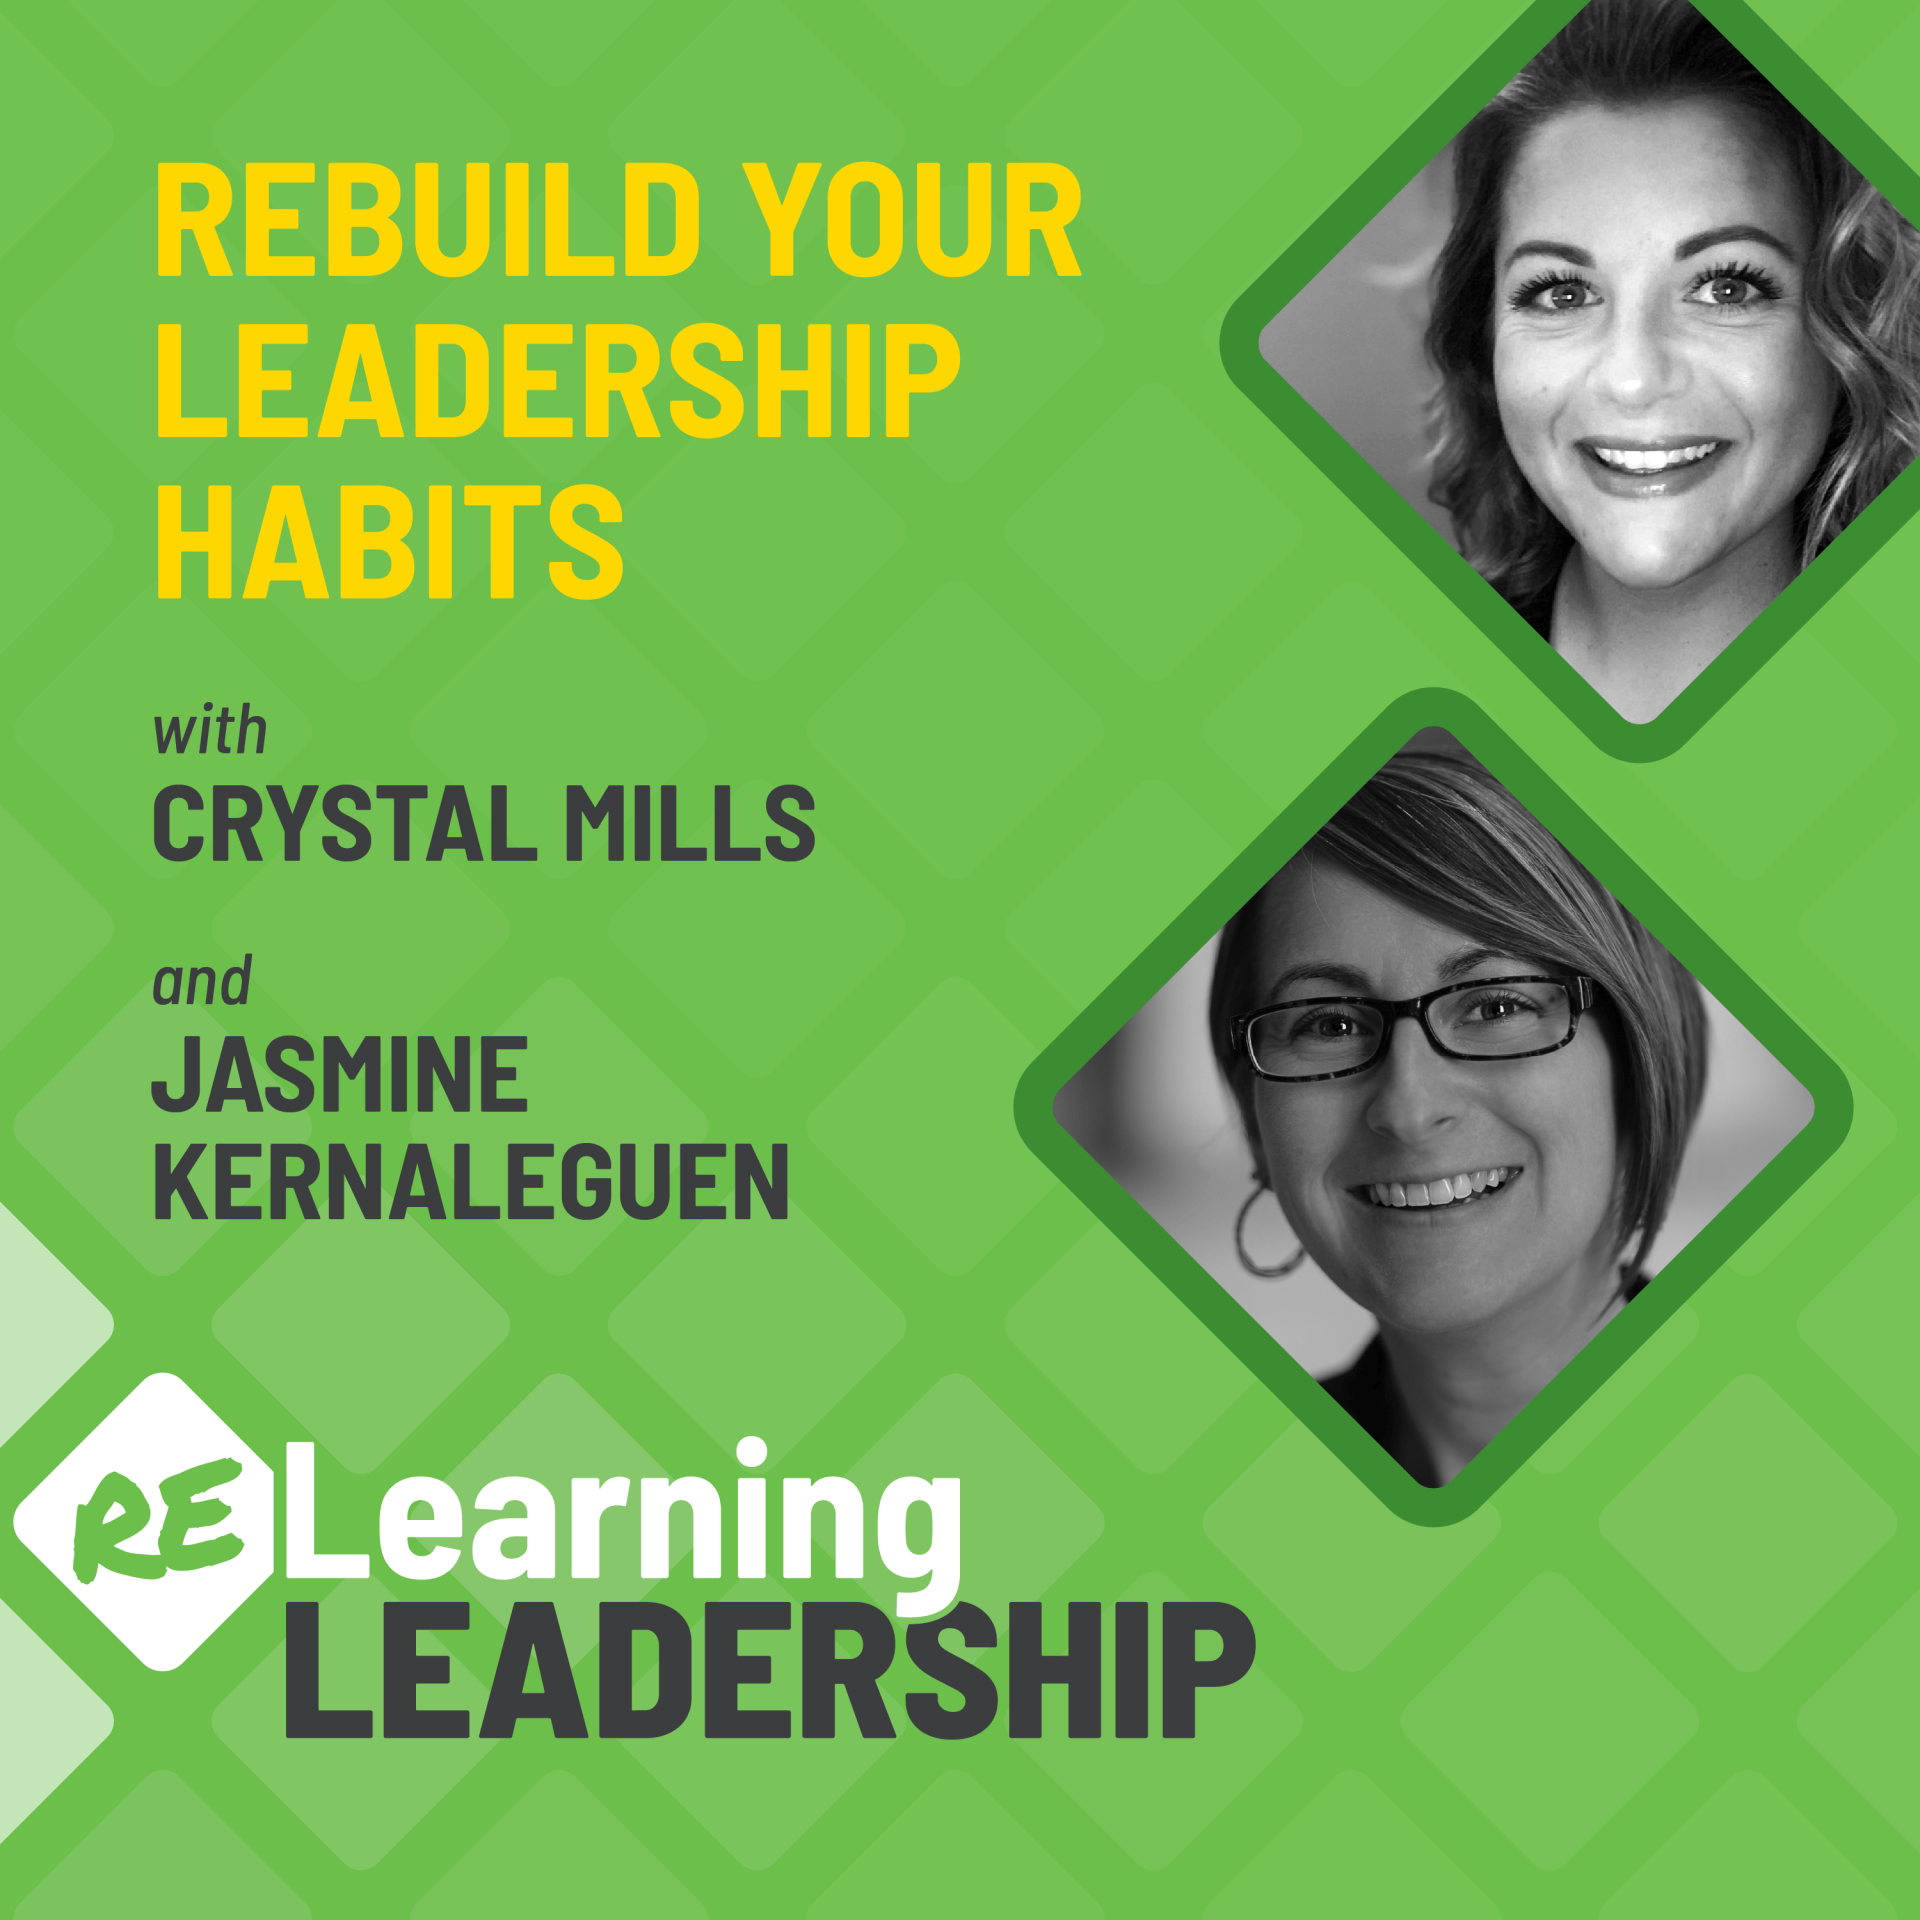 a poster for learning leadership with crystal mills and jasmine kernaleguen